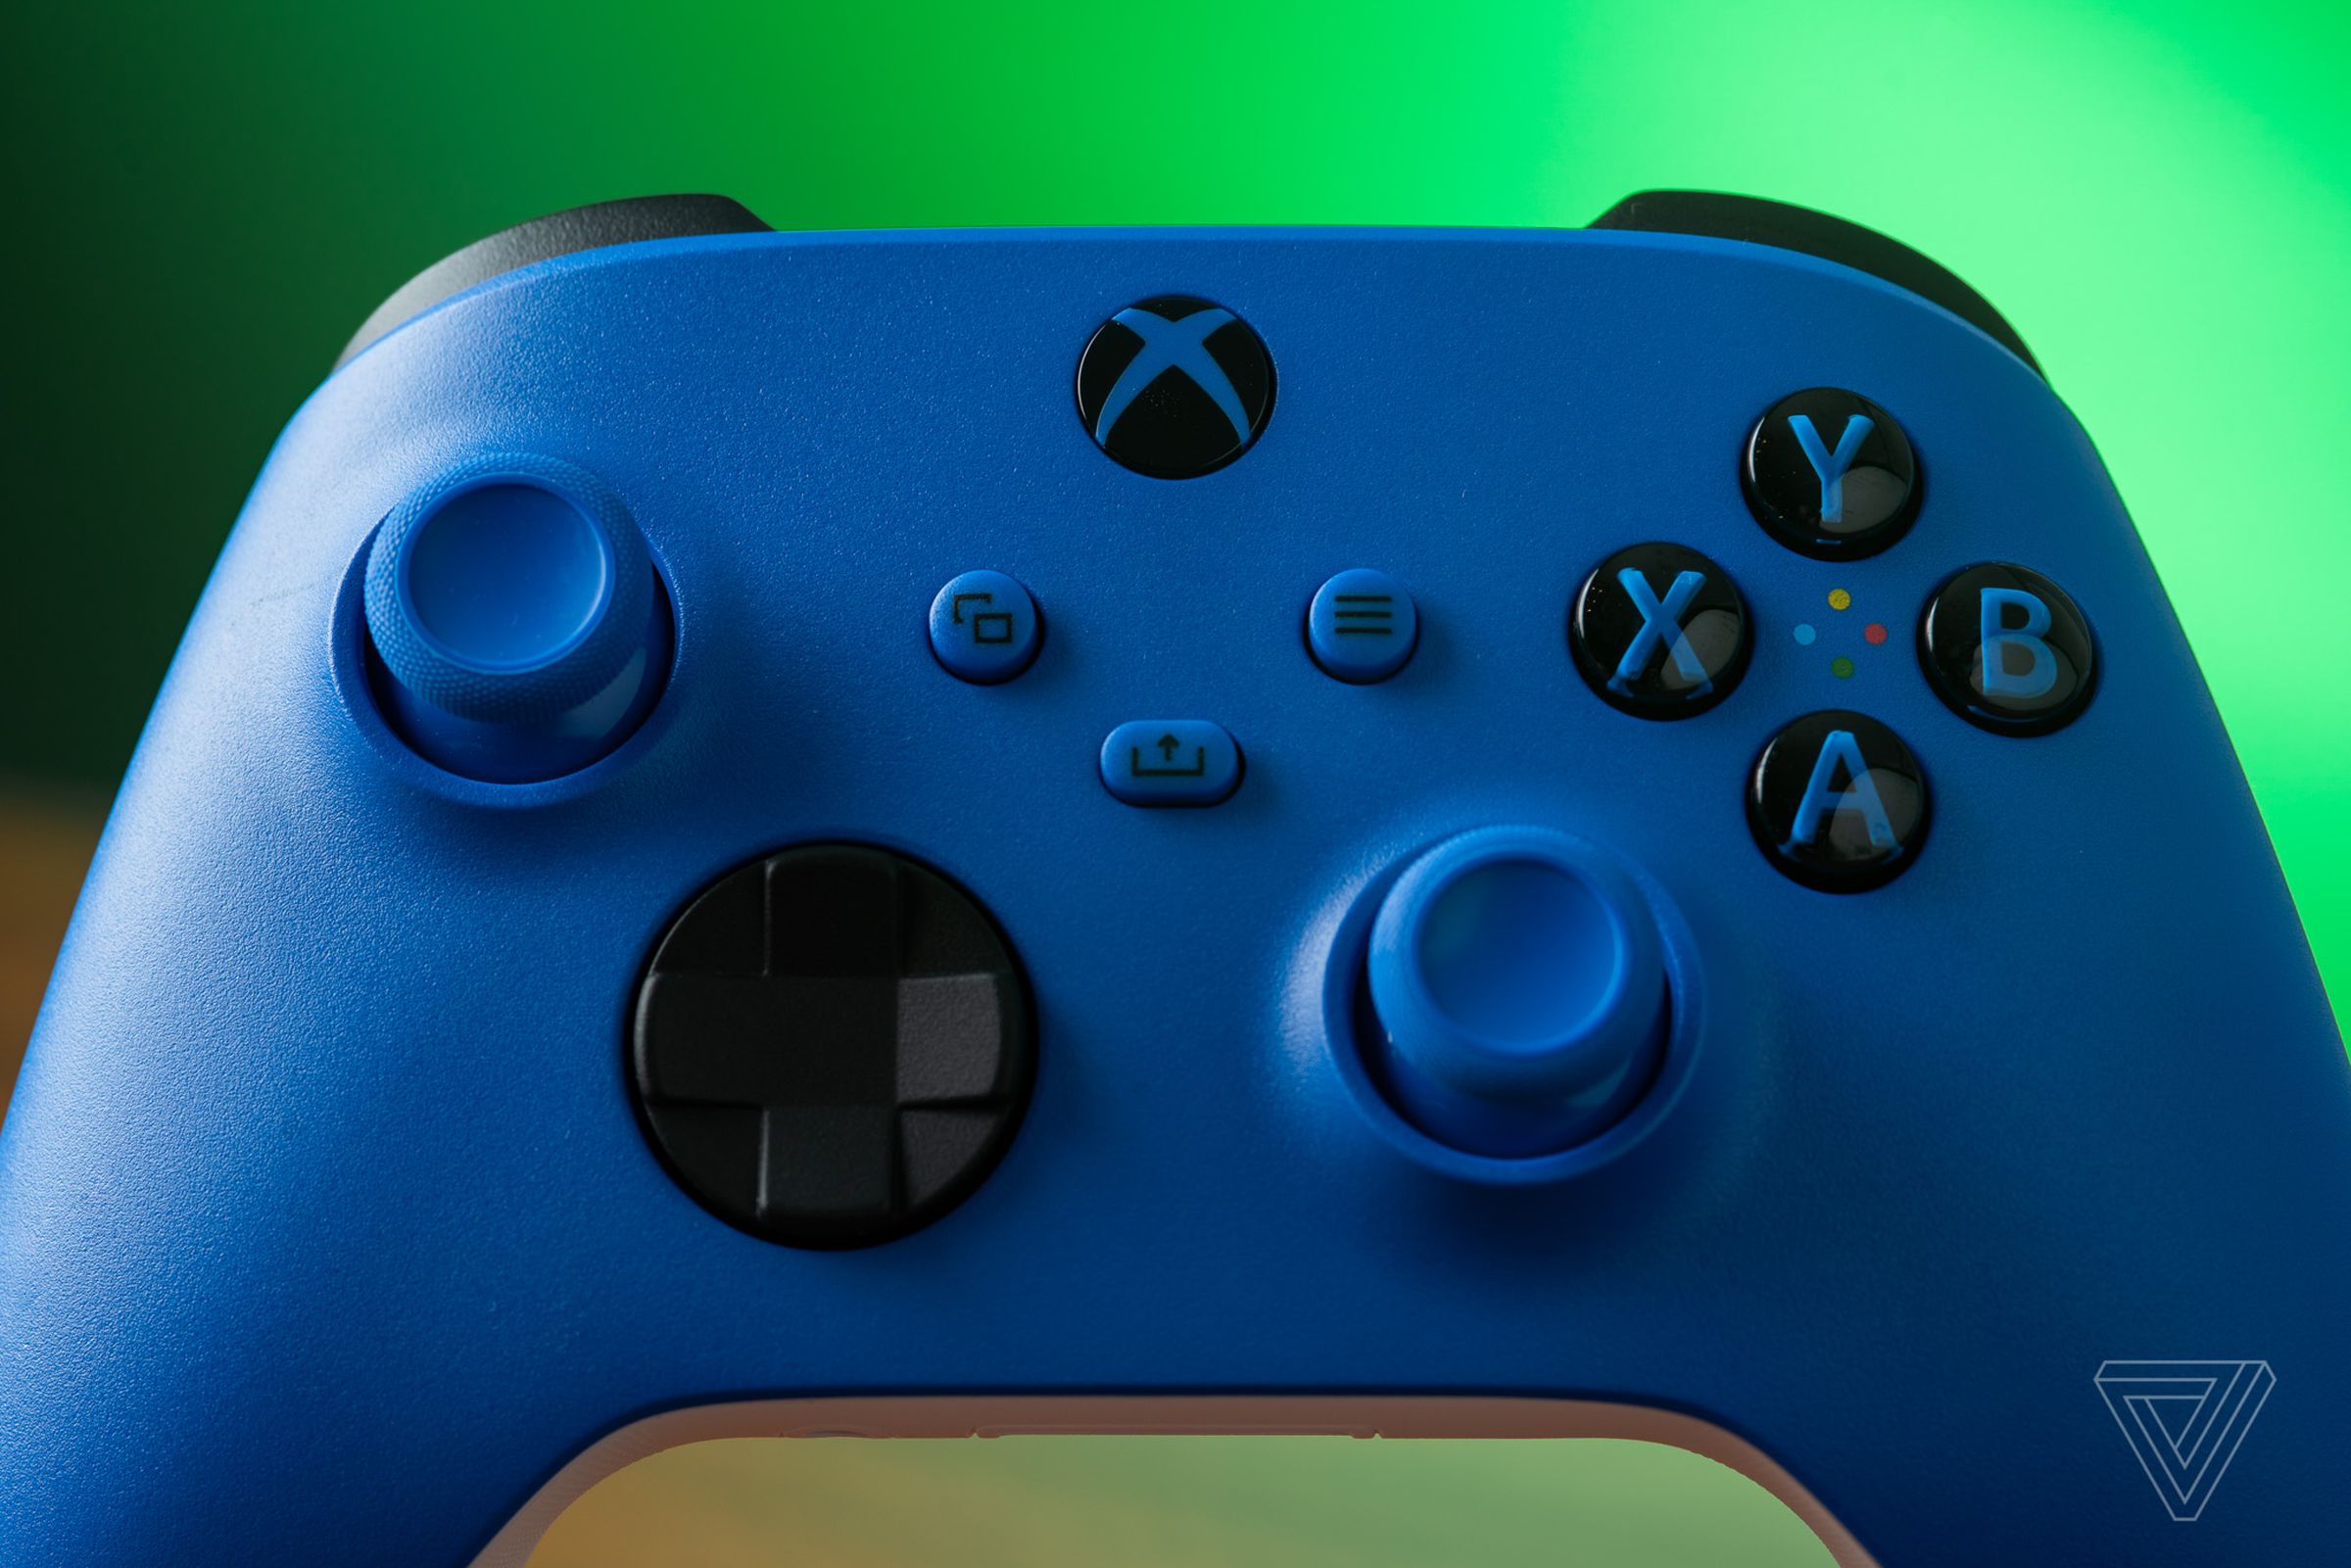 Attention to detail: Microsoft color matches the light-up Xbox button to the controller.